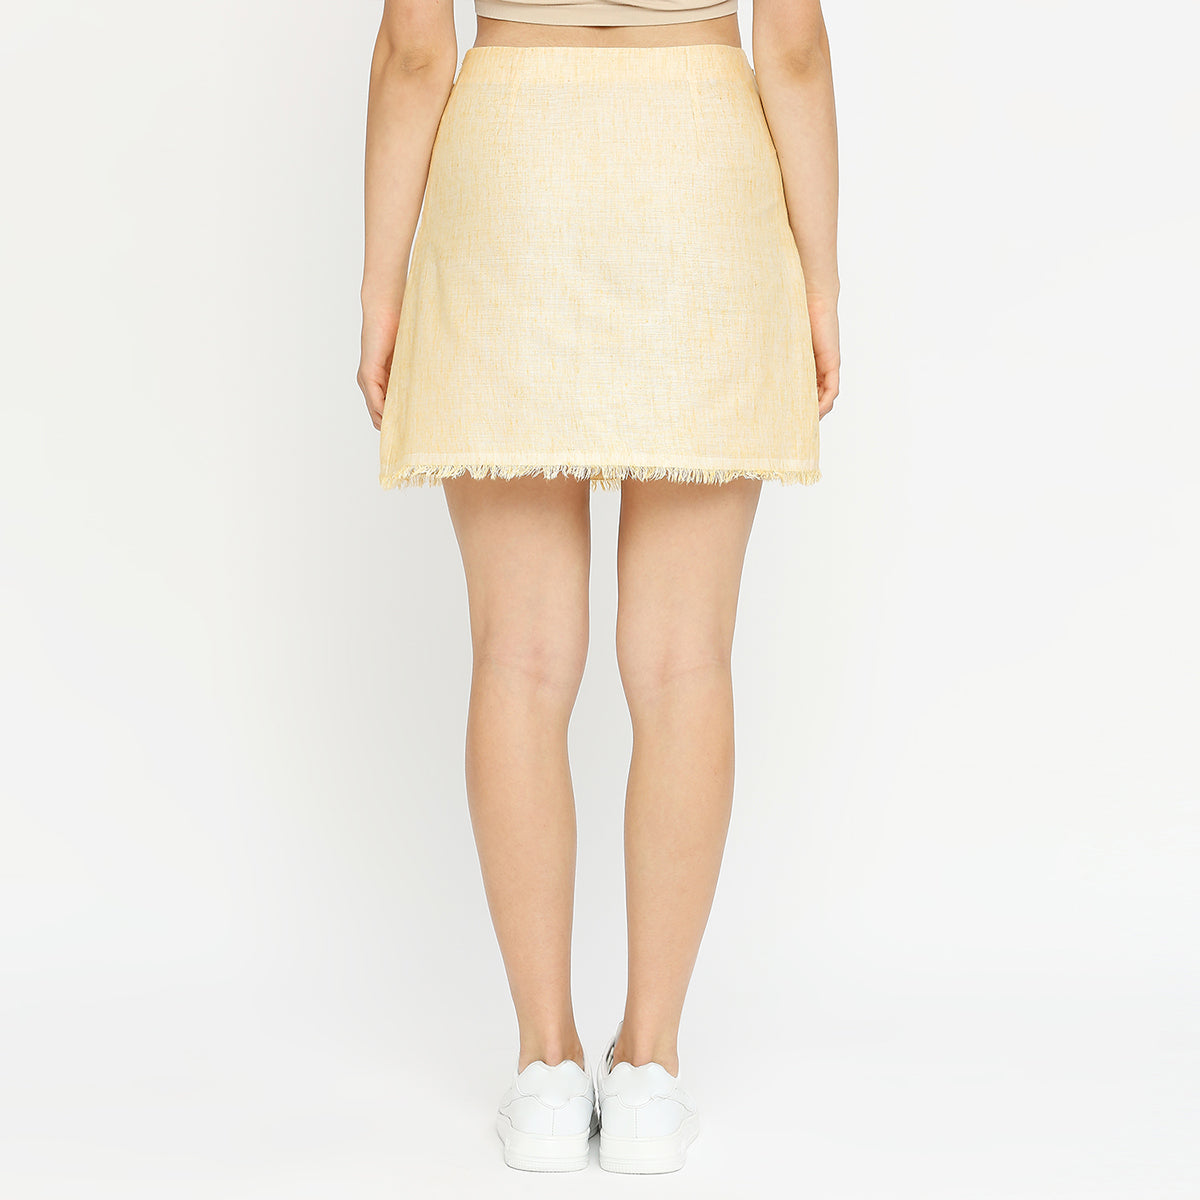 YELLOW COTTON PATCH POCCKET SKIRT